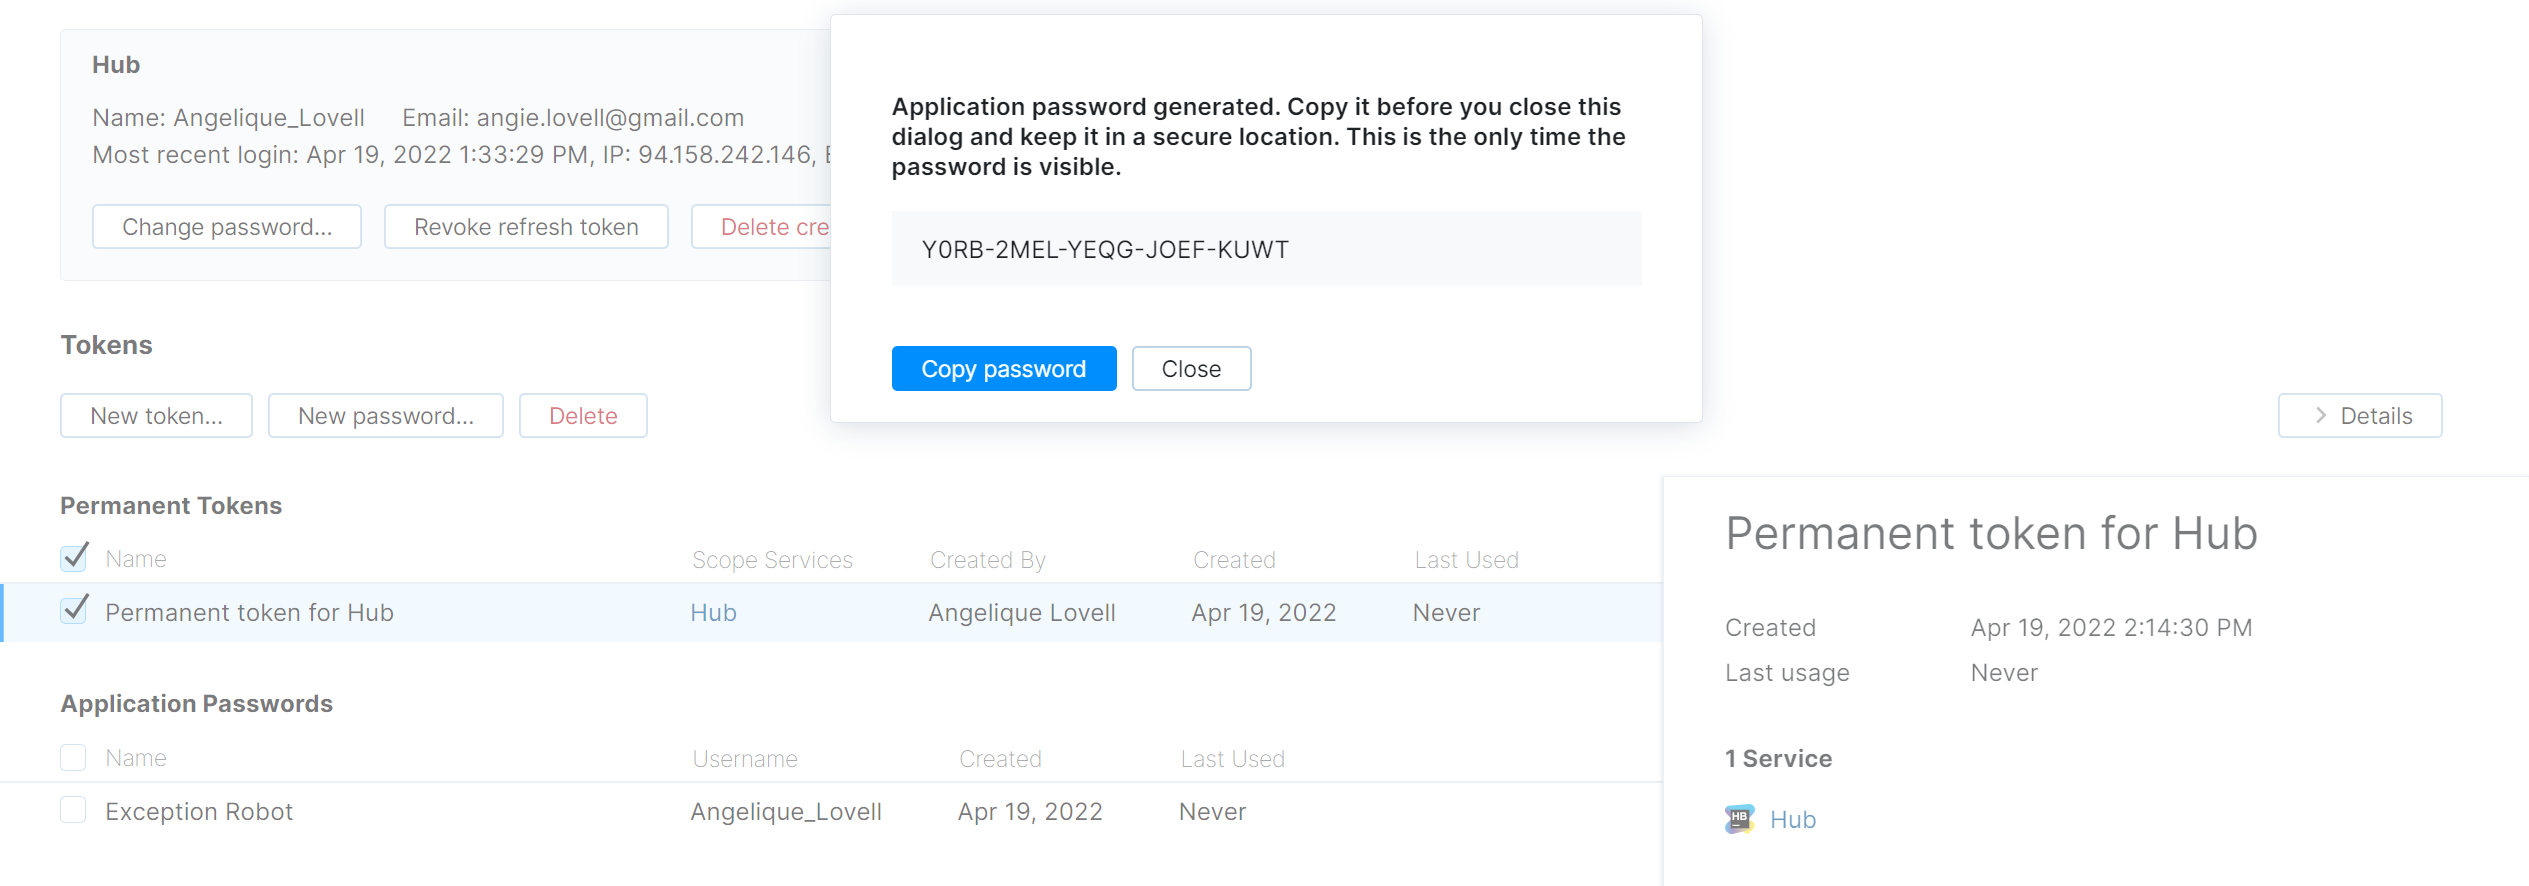 Application password generated